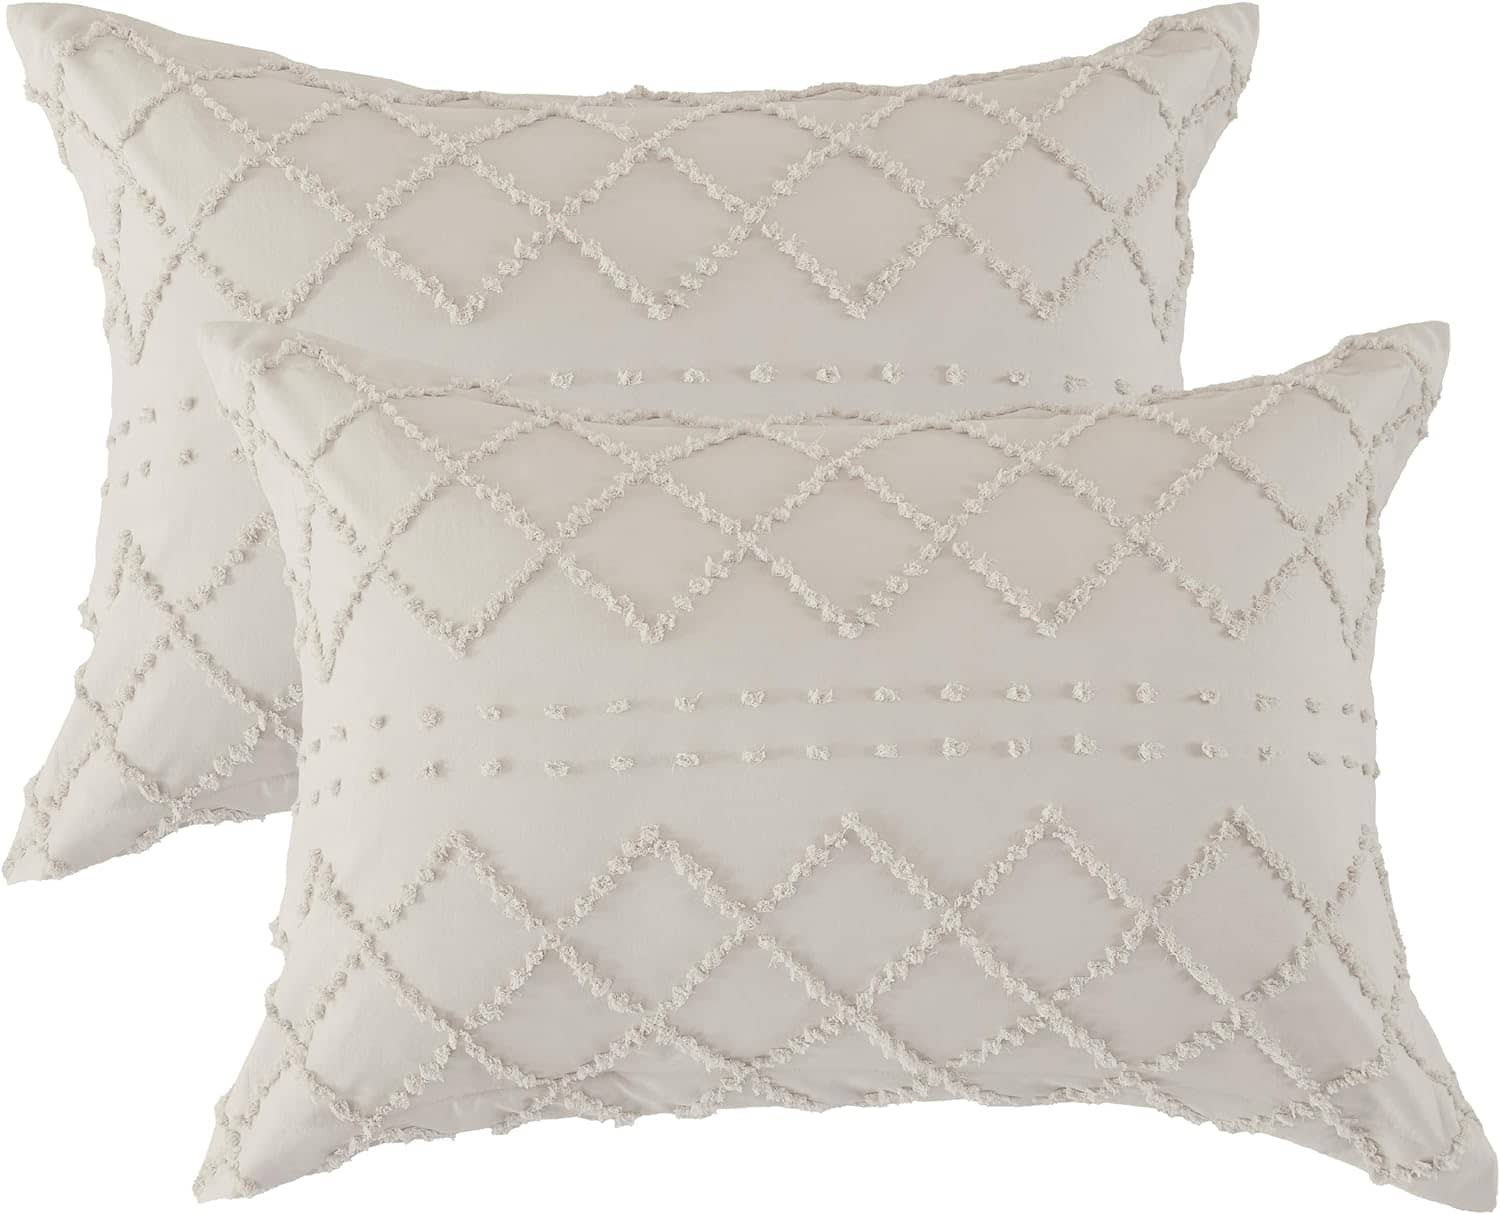 Tufted Embroidery Pillow Shams